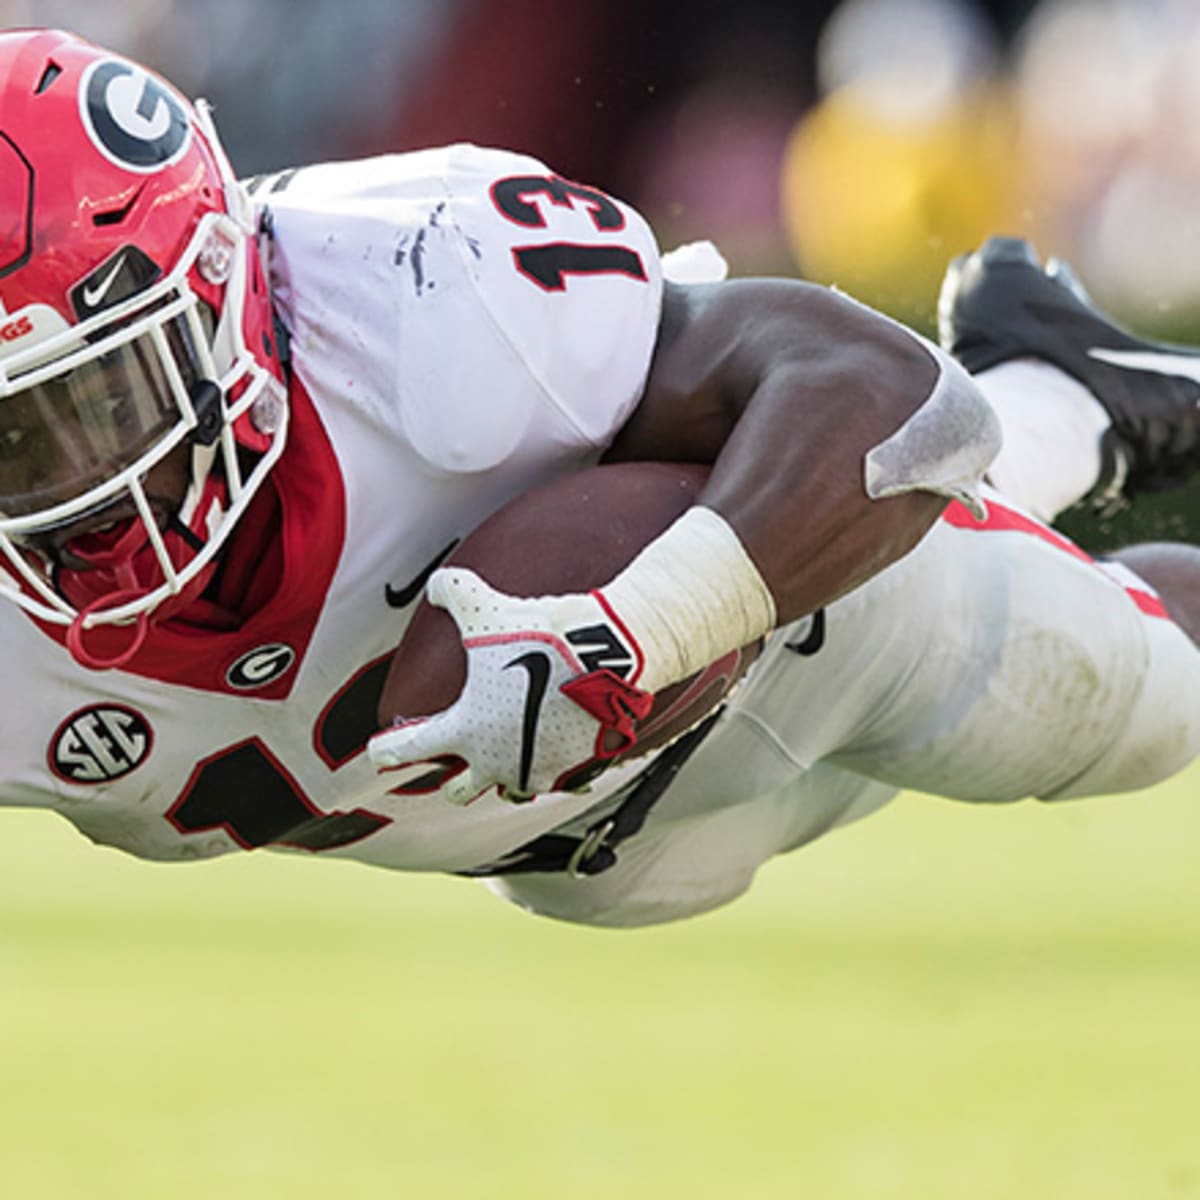 Louisville vs. Murray State odds, line, time: 2023 college football picks,  predictions by expert on 7-2 run 